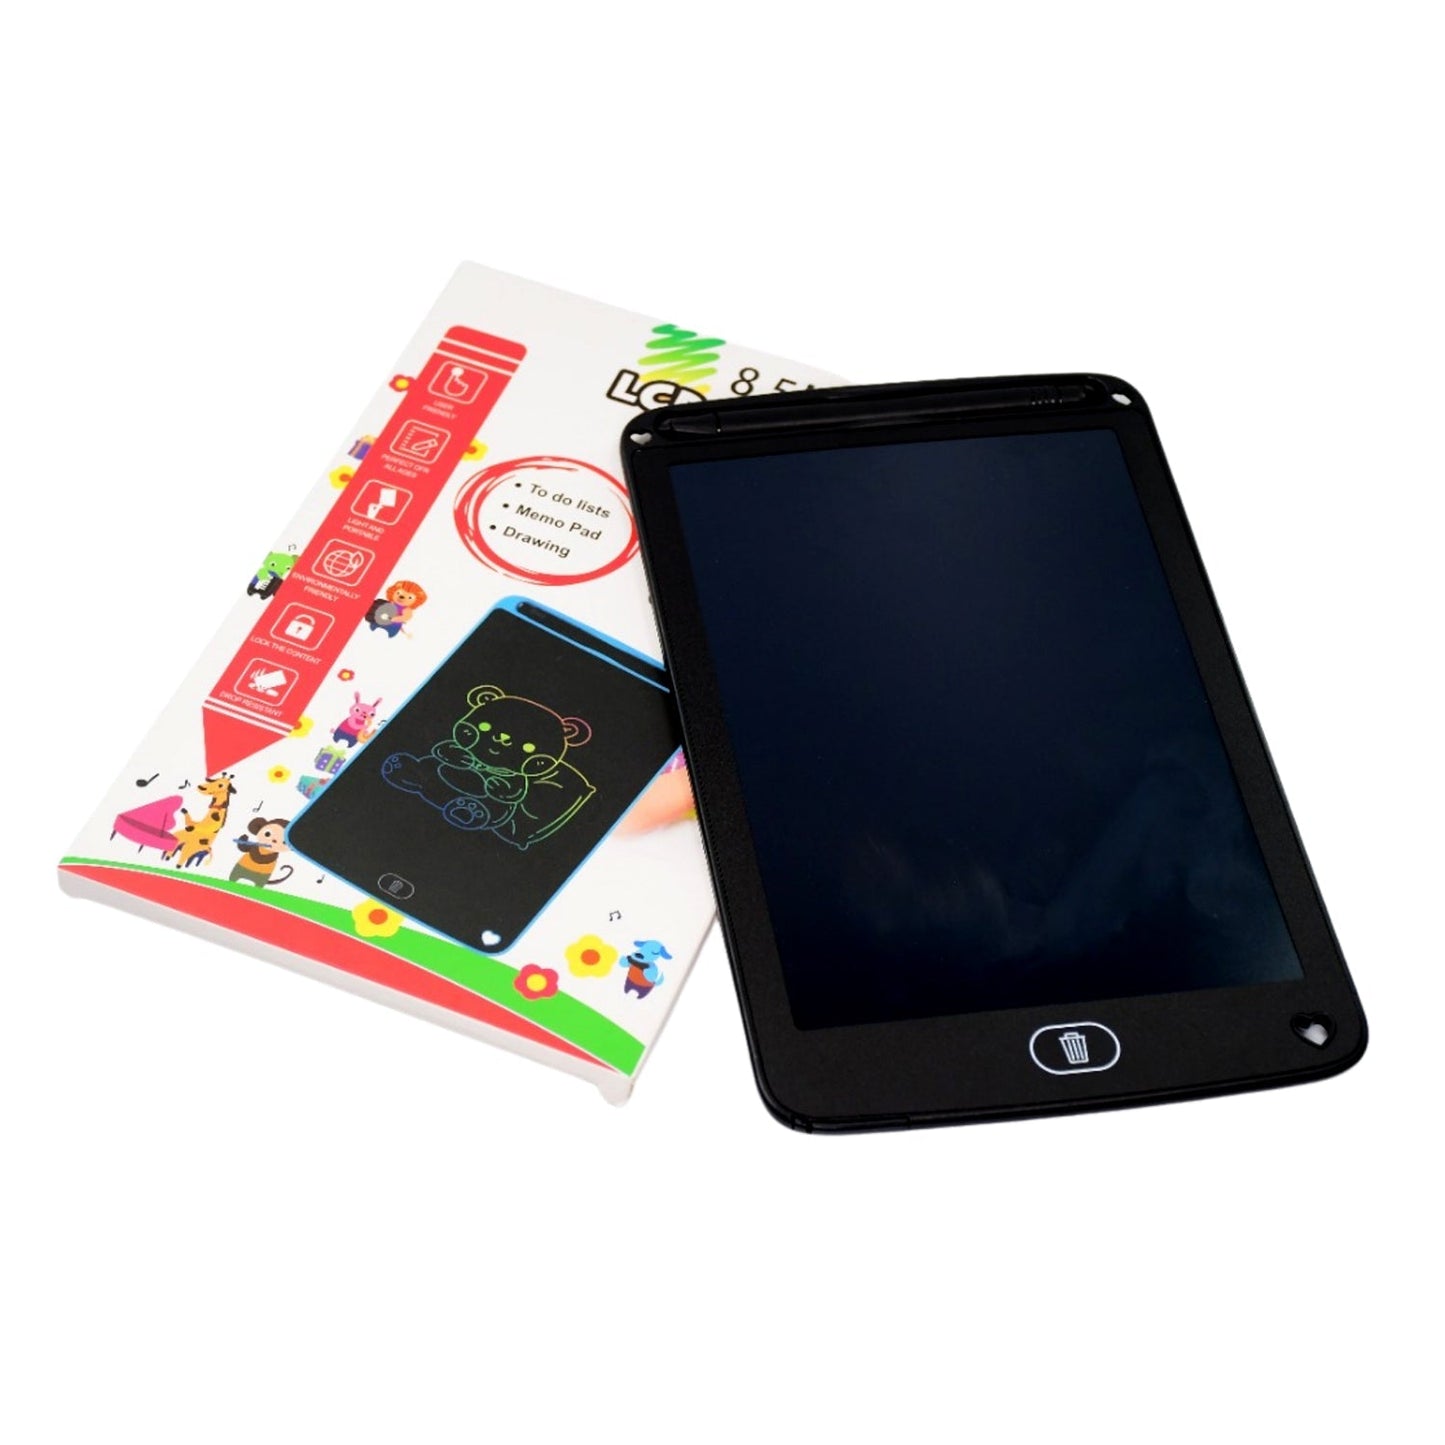 1360A LCD PORTABLE WRITING PAD/TABLET FOR KIDS - 8.5 INCH DeoDap